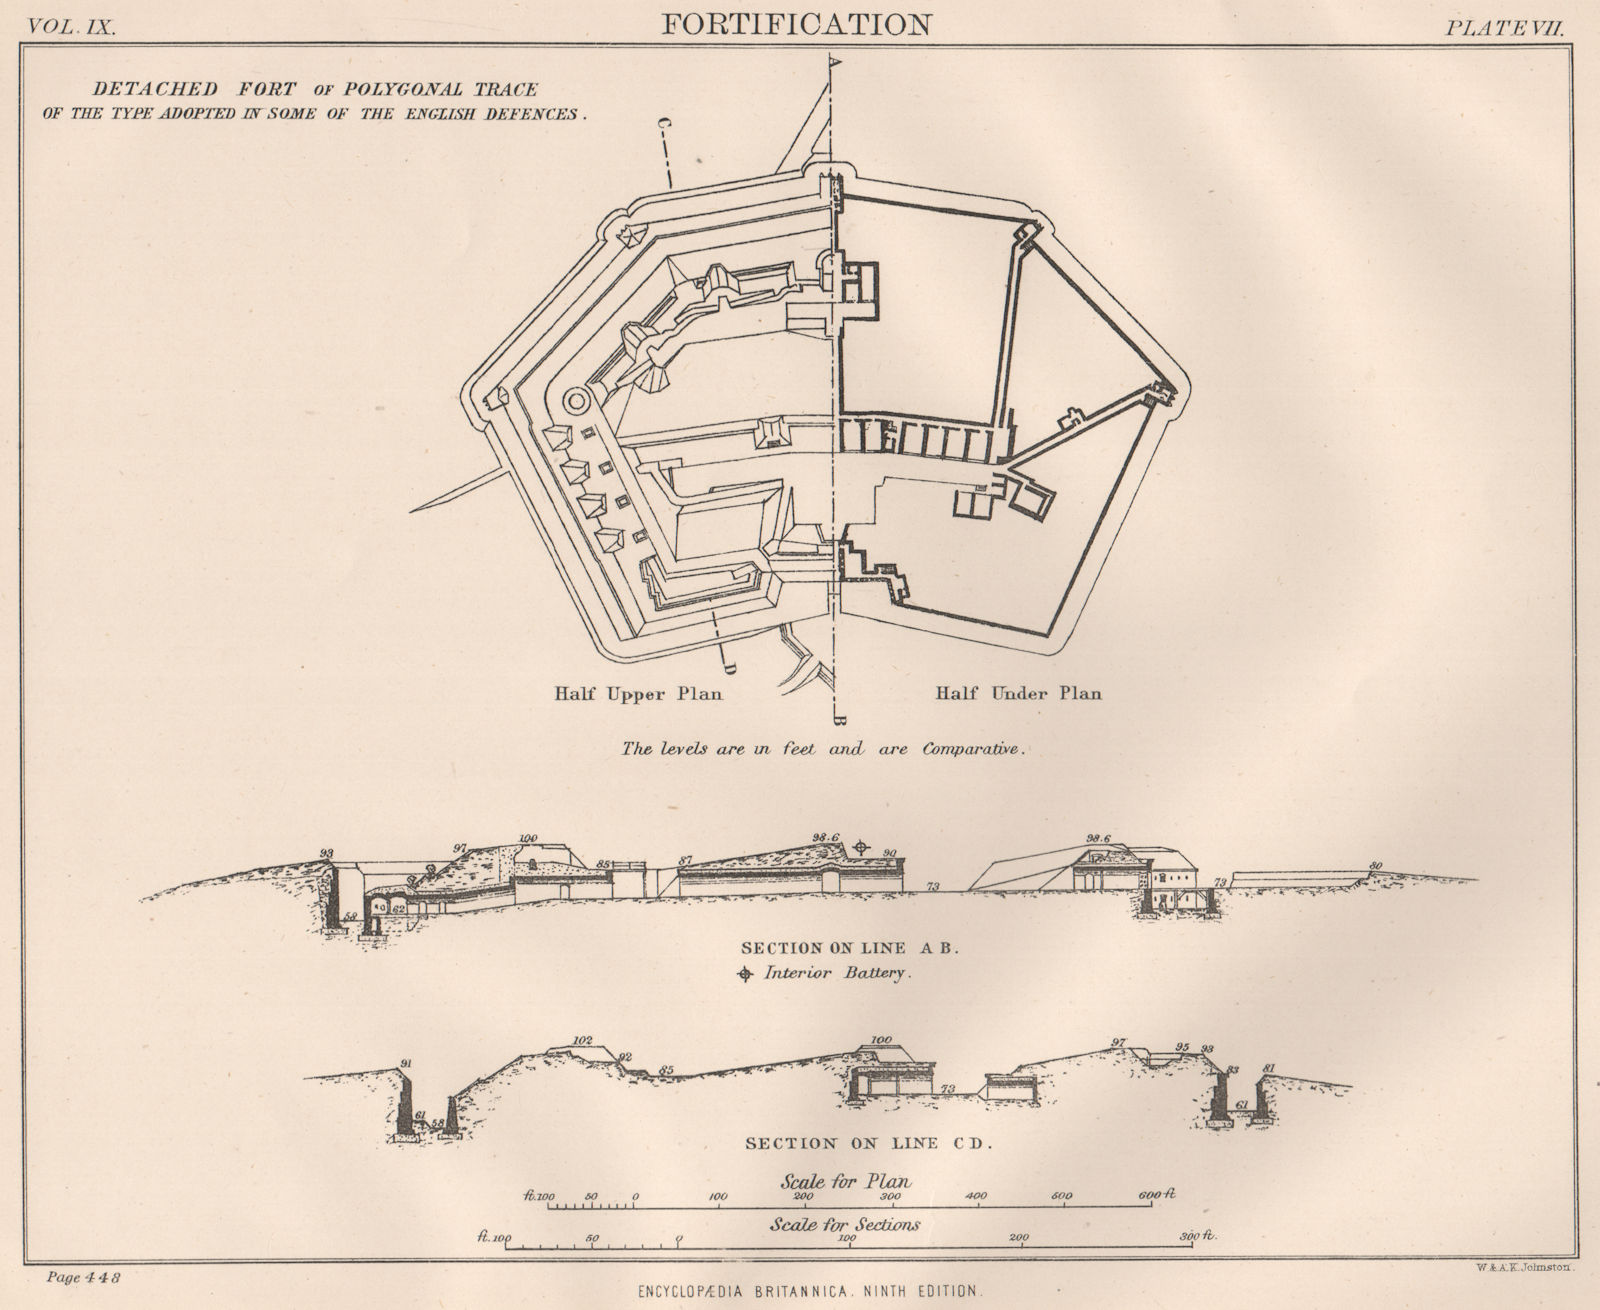 Associate Product FORTIFICATIONS. Detached fort of Polygonal Trace. English defensive type 1898